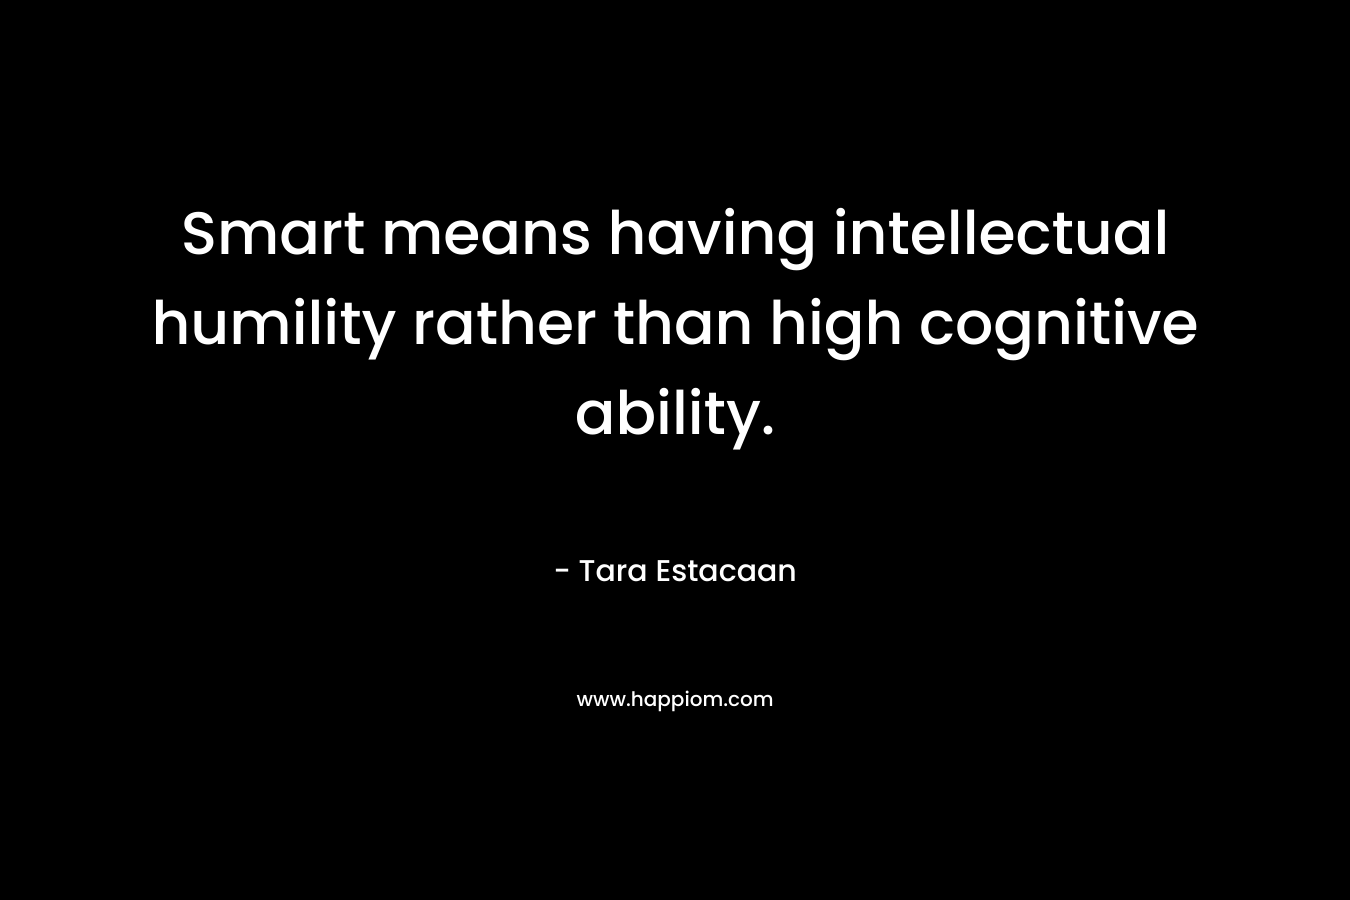 Smart means having intellectual humility rather than high cognitive ability.